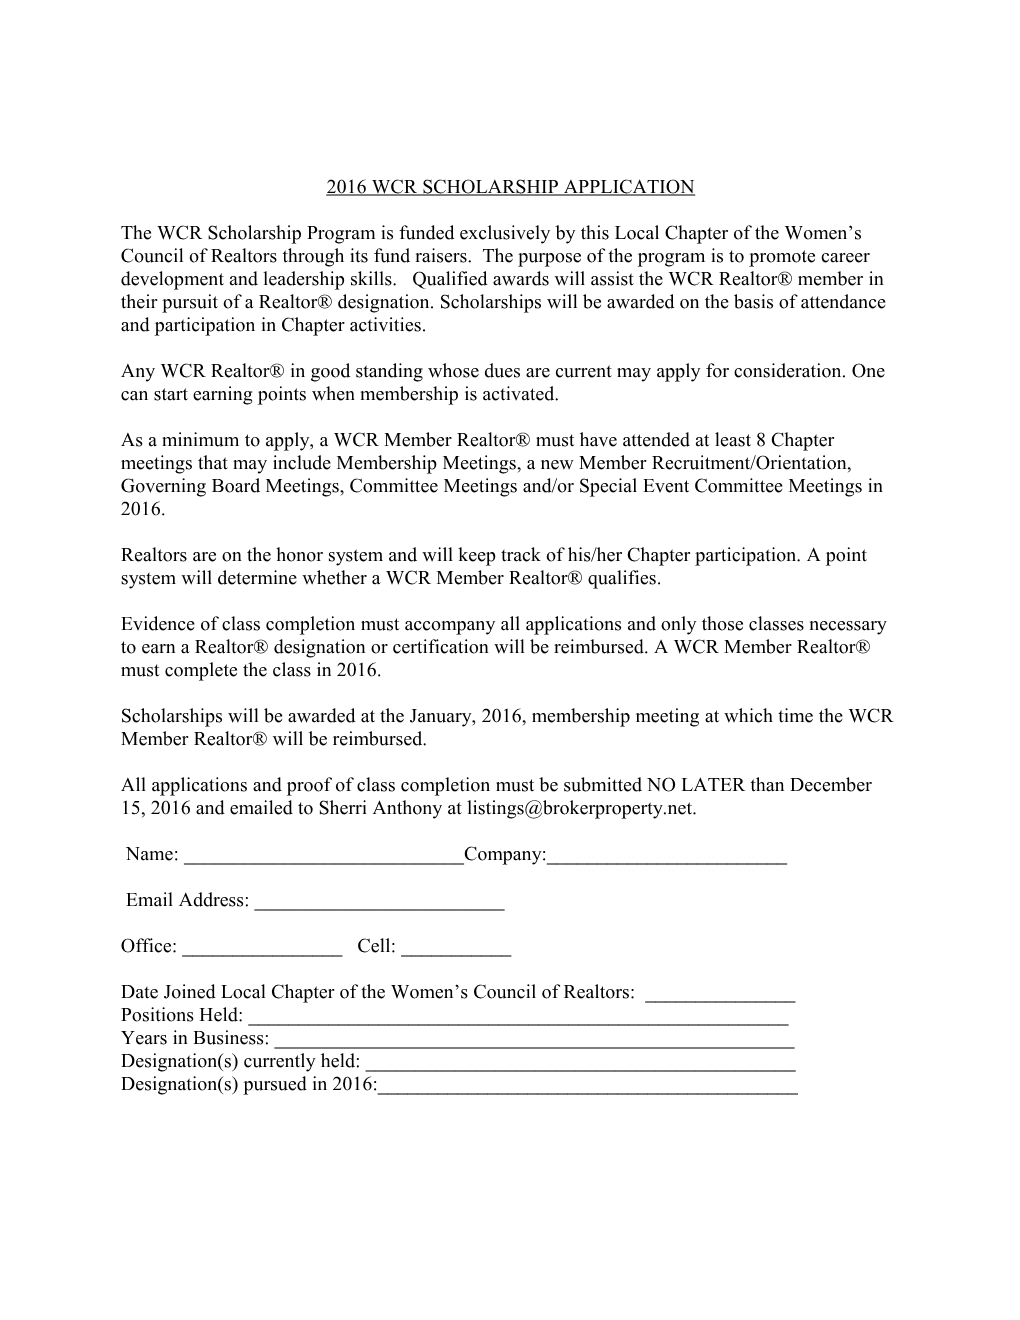 WCR Scholarship Information